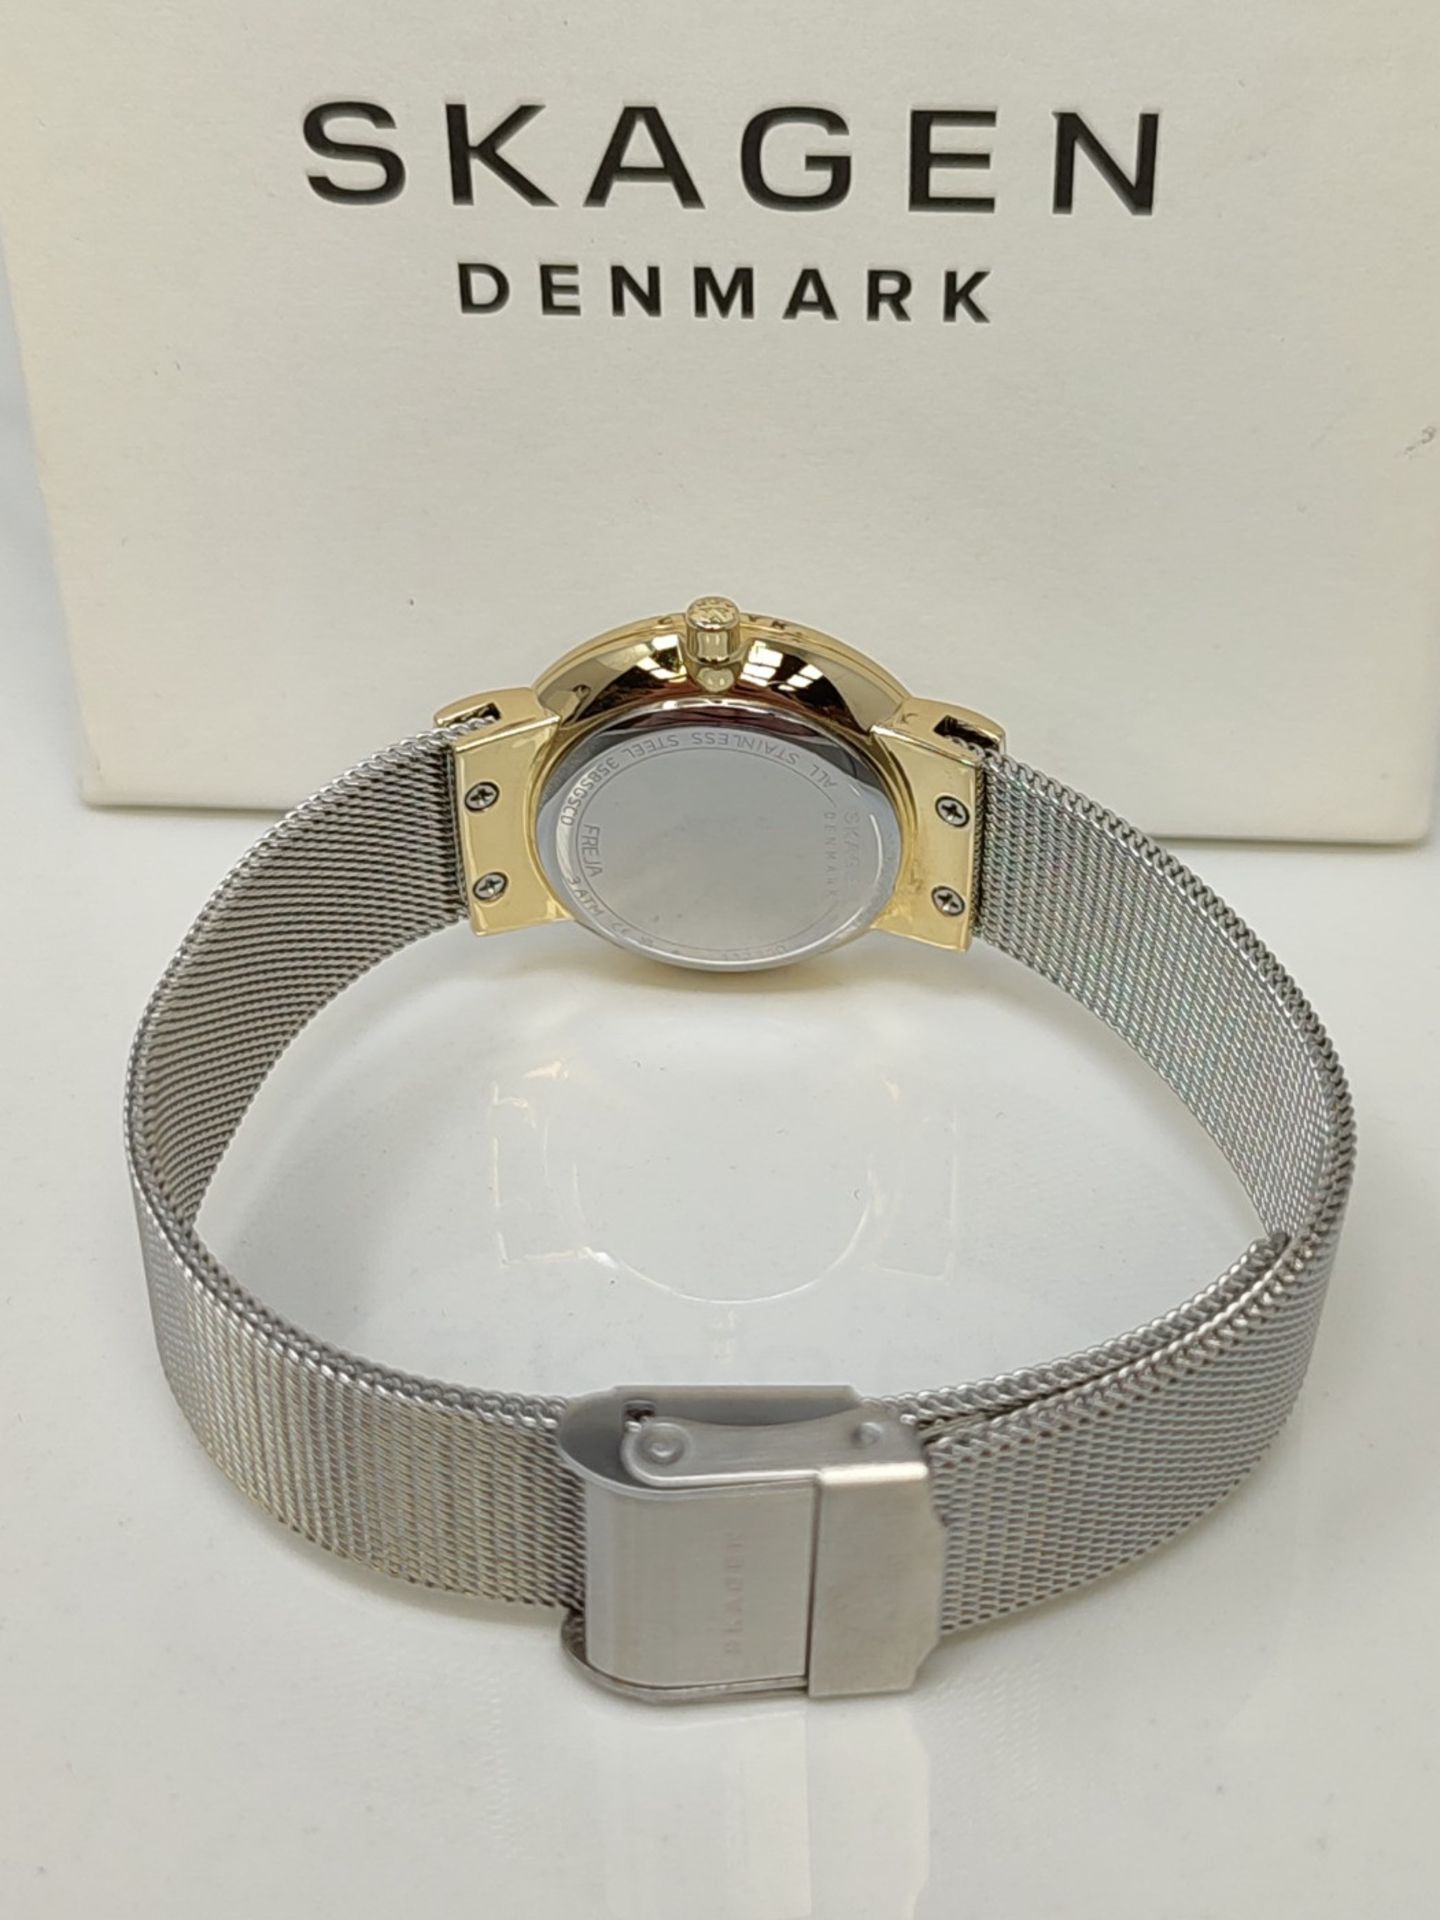 RRP £55.00 Skagen women's watch Freja Lille, two-hand movement, 26mm gold stainless steel case wi - Image 3 of 3